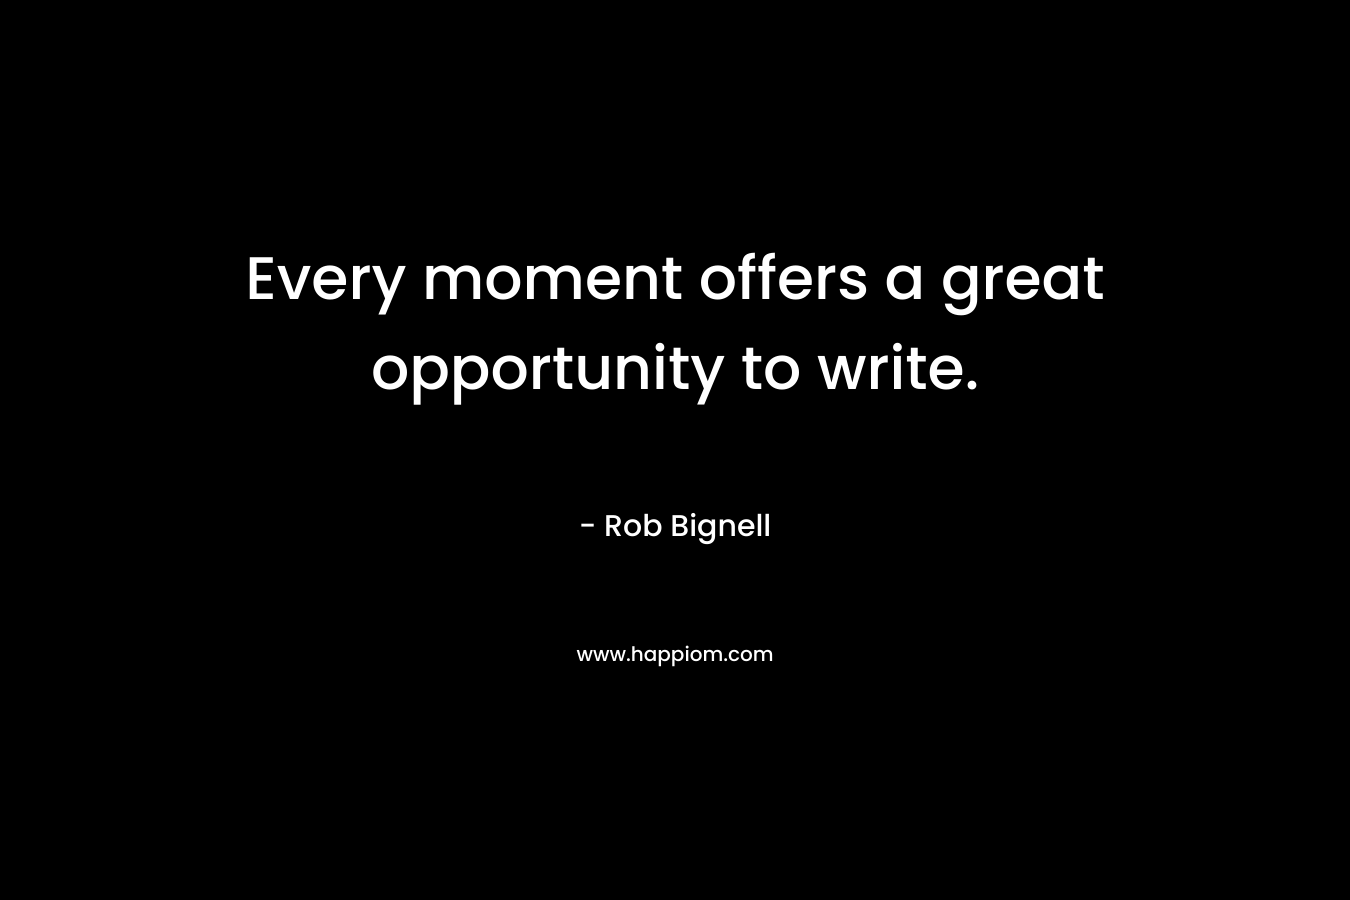 Every moment offers a great opportunity to write.